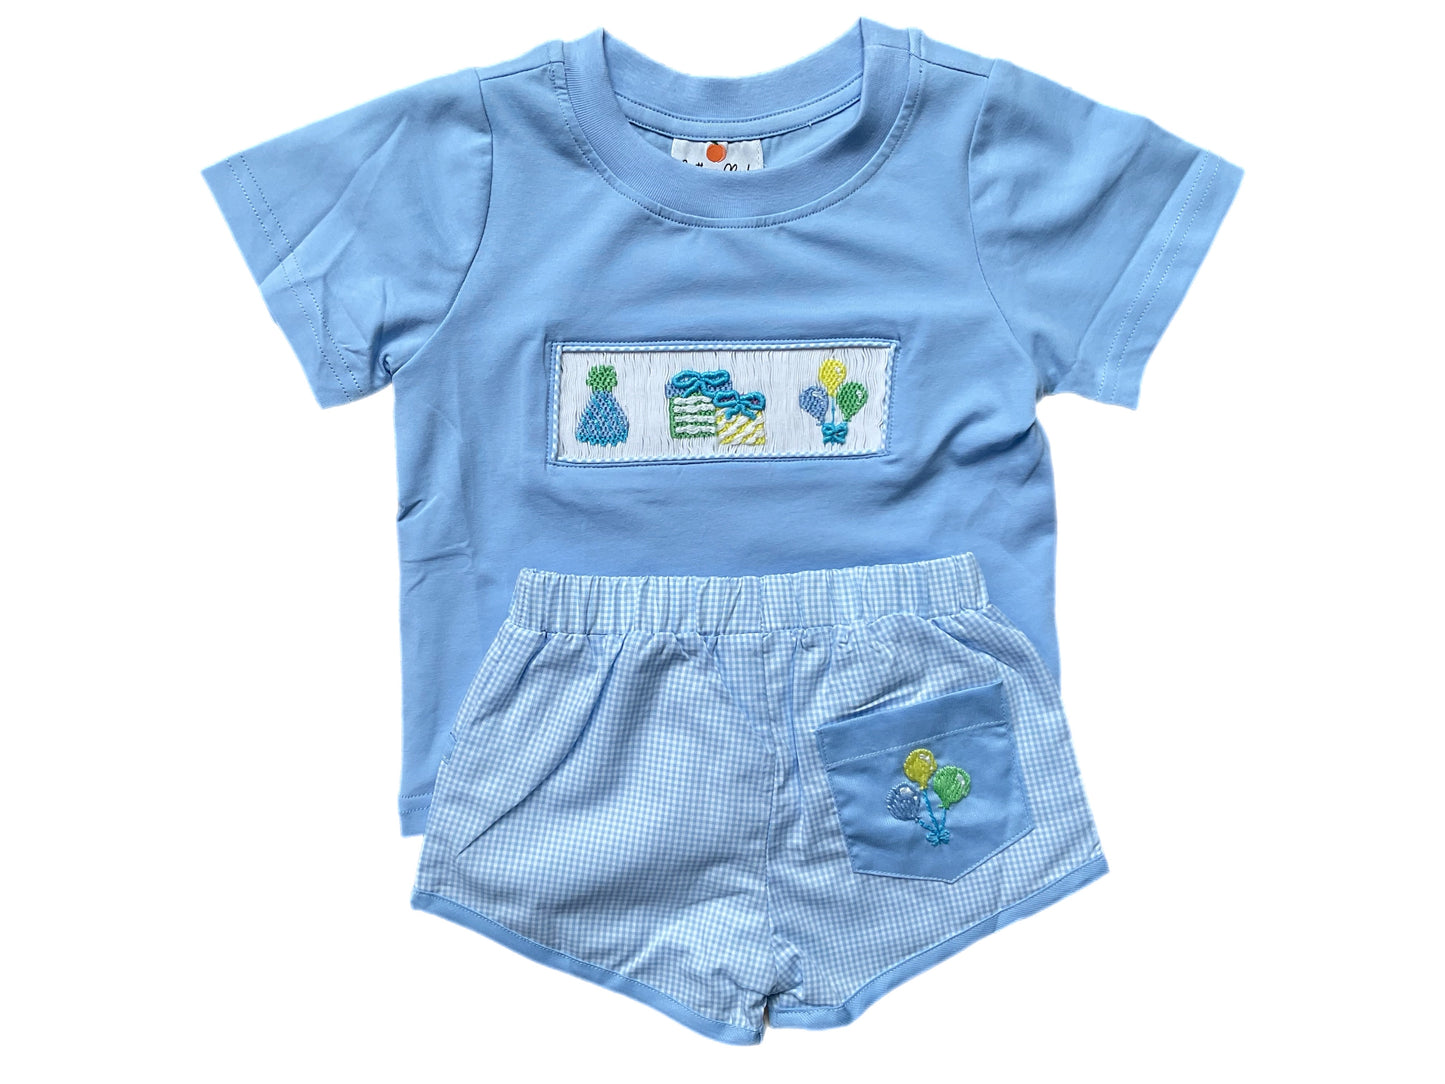 smocked birthday outfit for boys